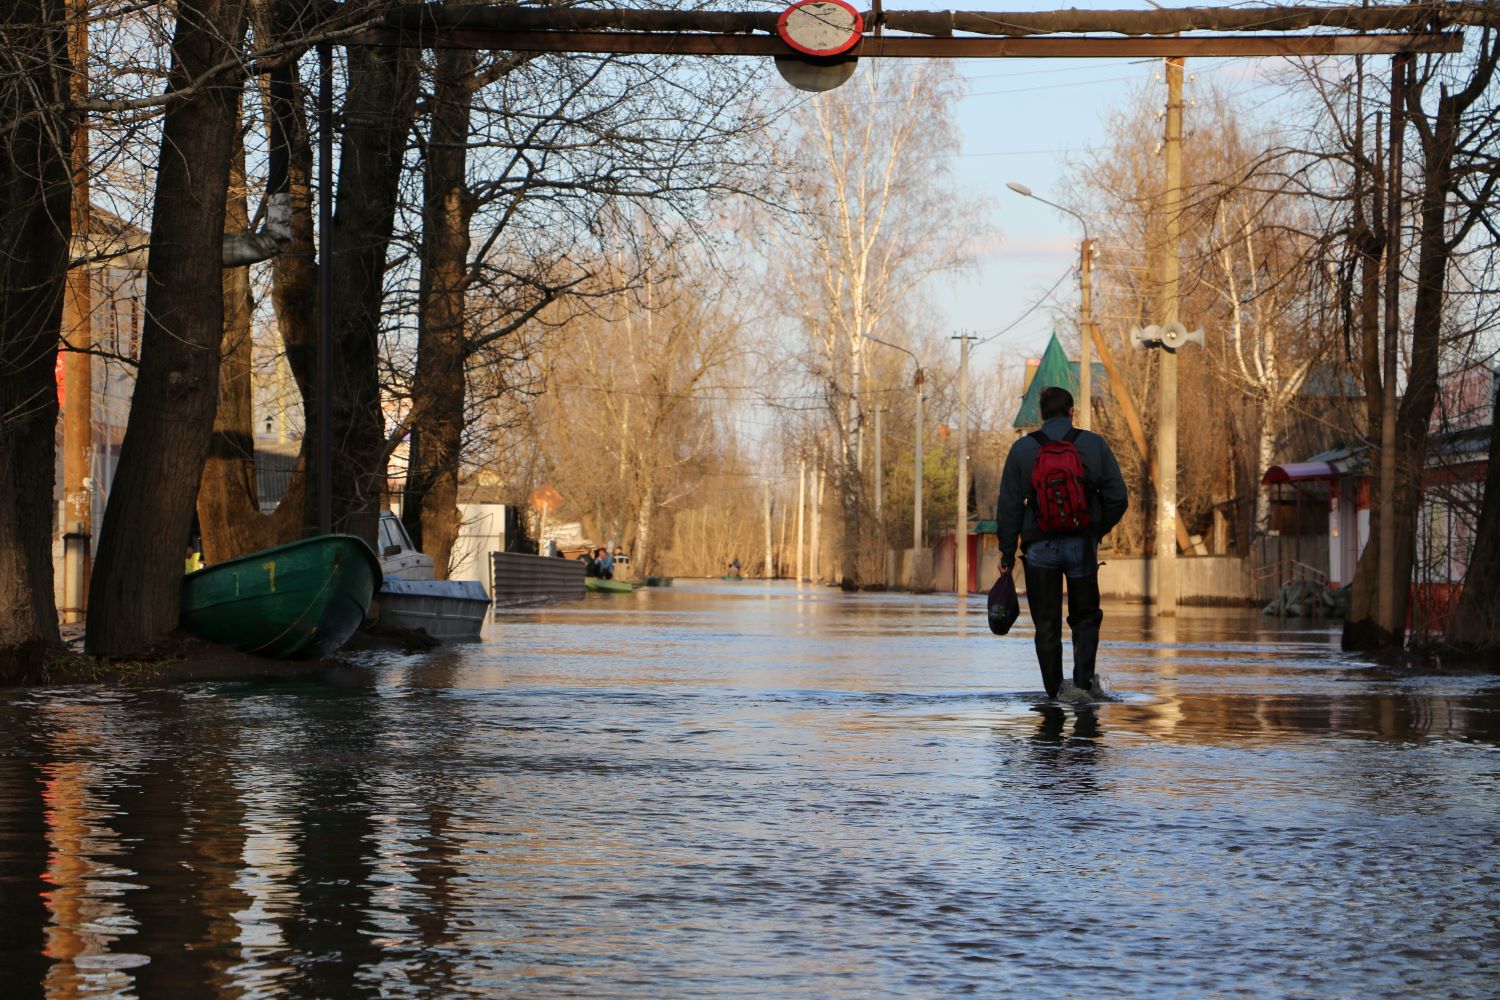 Image of man surrounded by flooded area